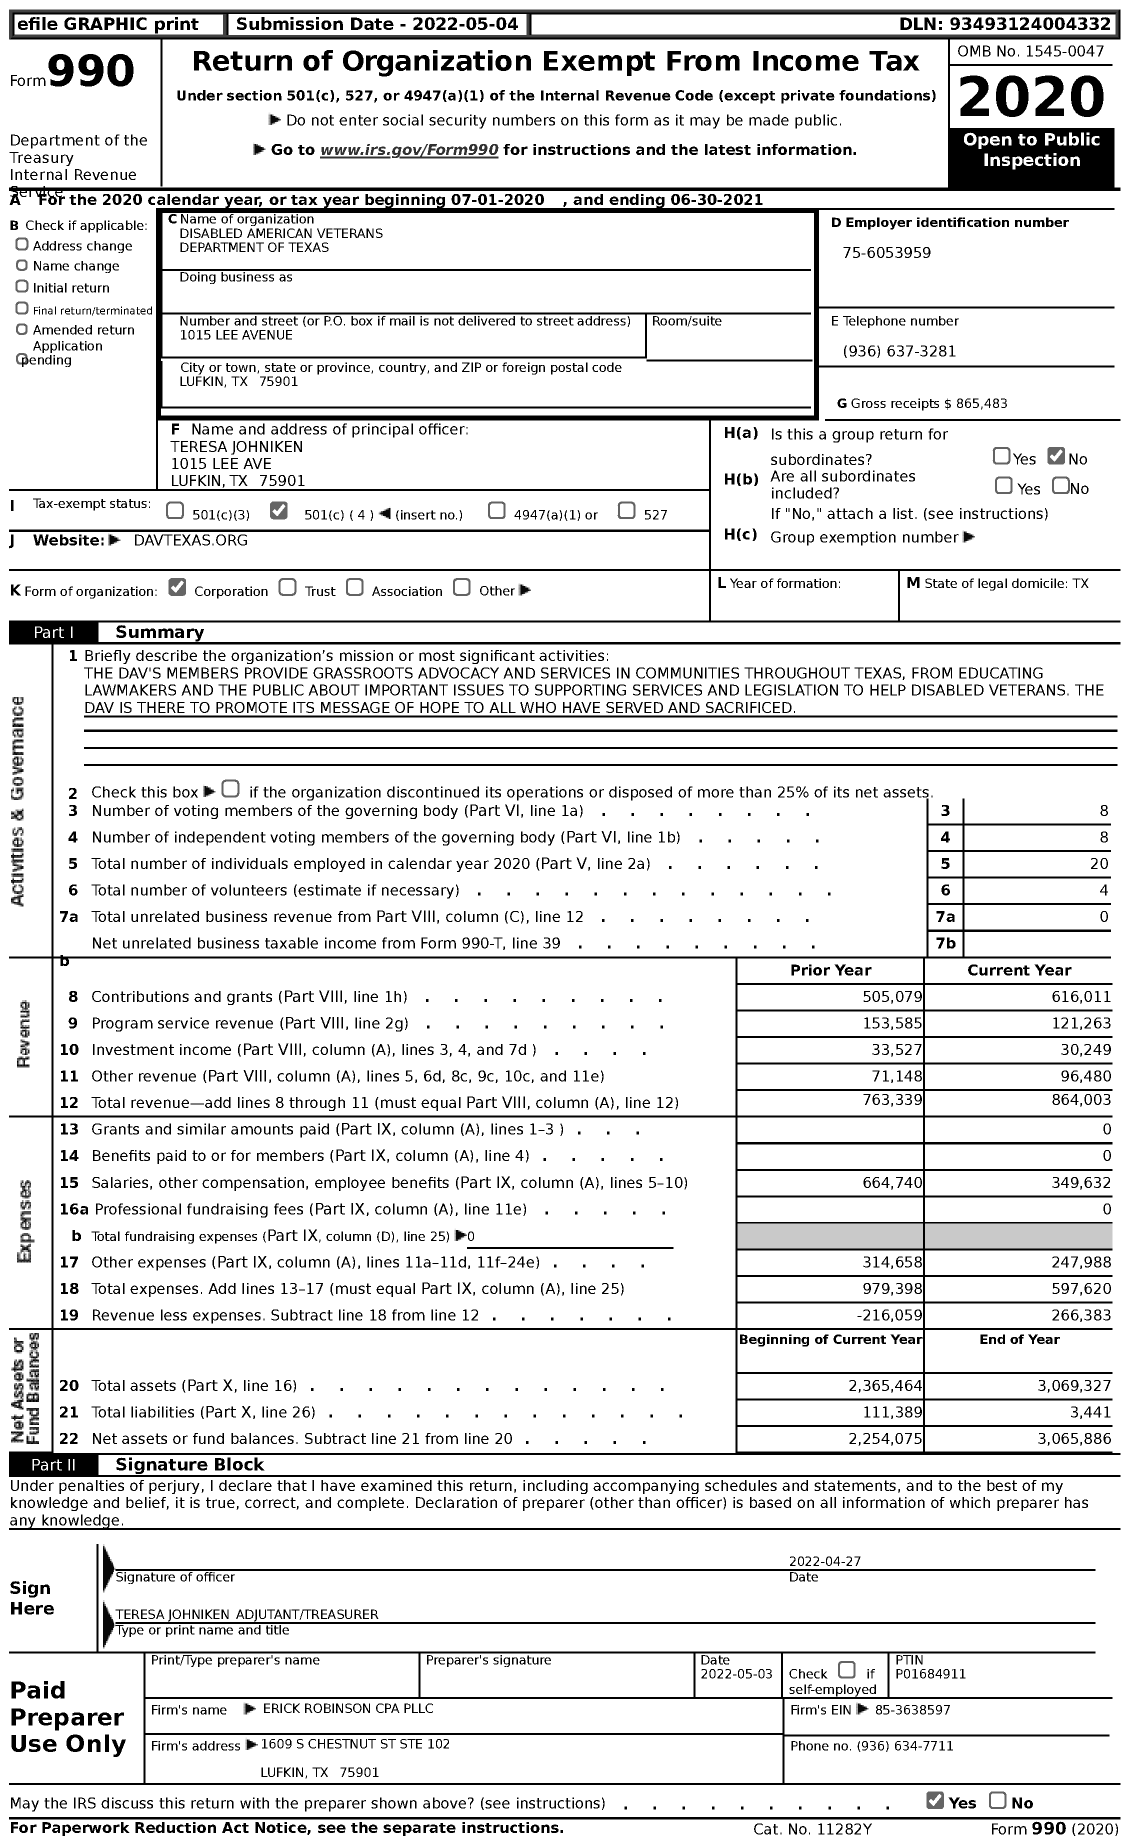 Image of first page of 2020 Form 990 for Disabled American Veterans - Dept of Texas